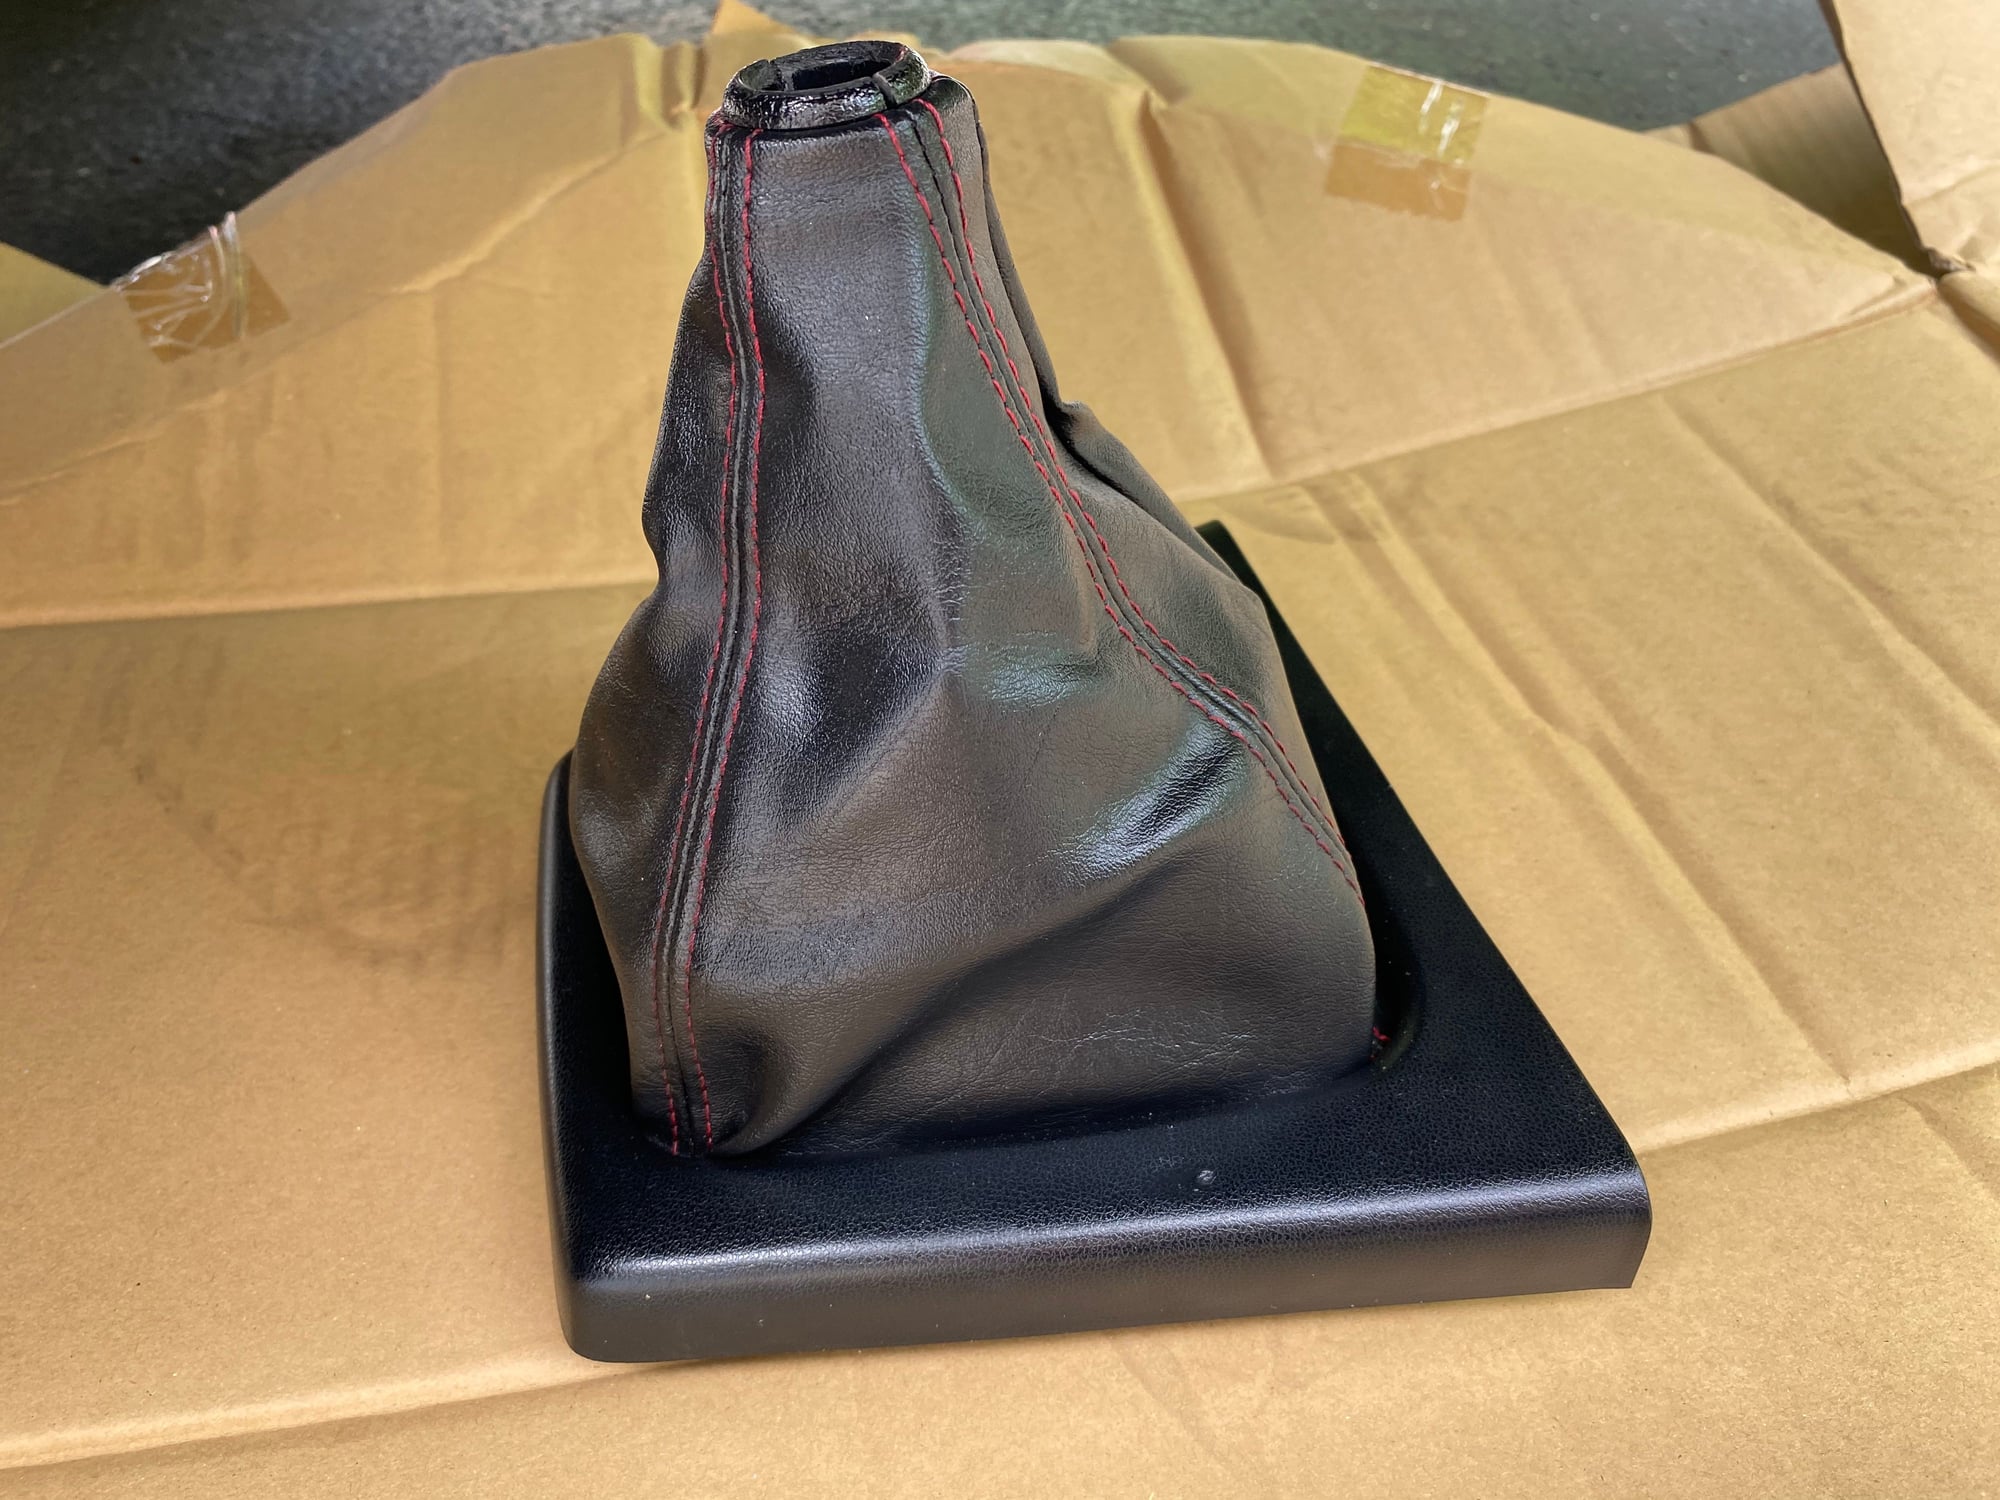 Interior/Upholstery - R Magic Leather shift Boot! Rx-7 FC - Used - 1986 to 1991 Mazda RX-7 - Prince Frederick, MD 20678, United States